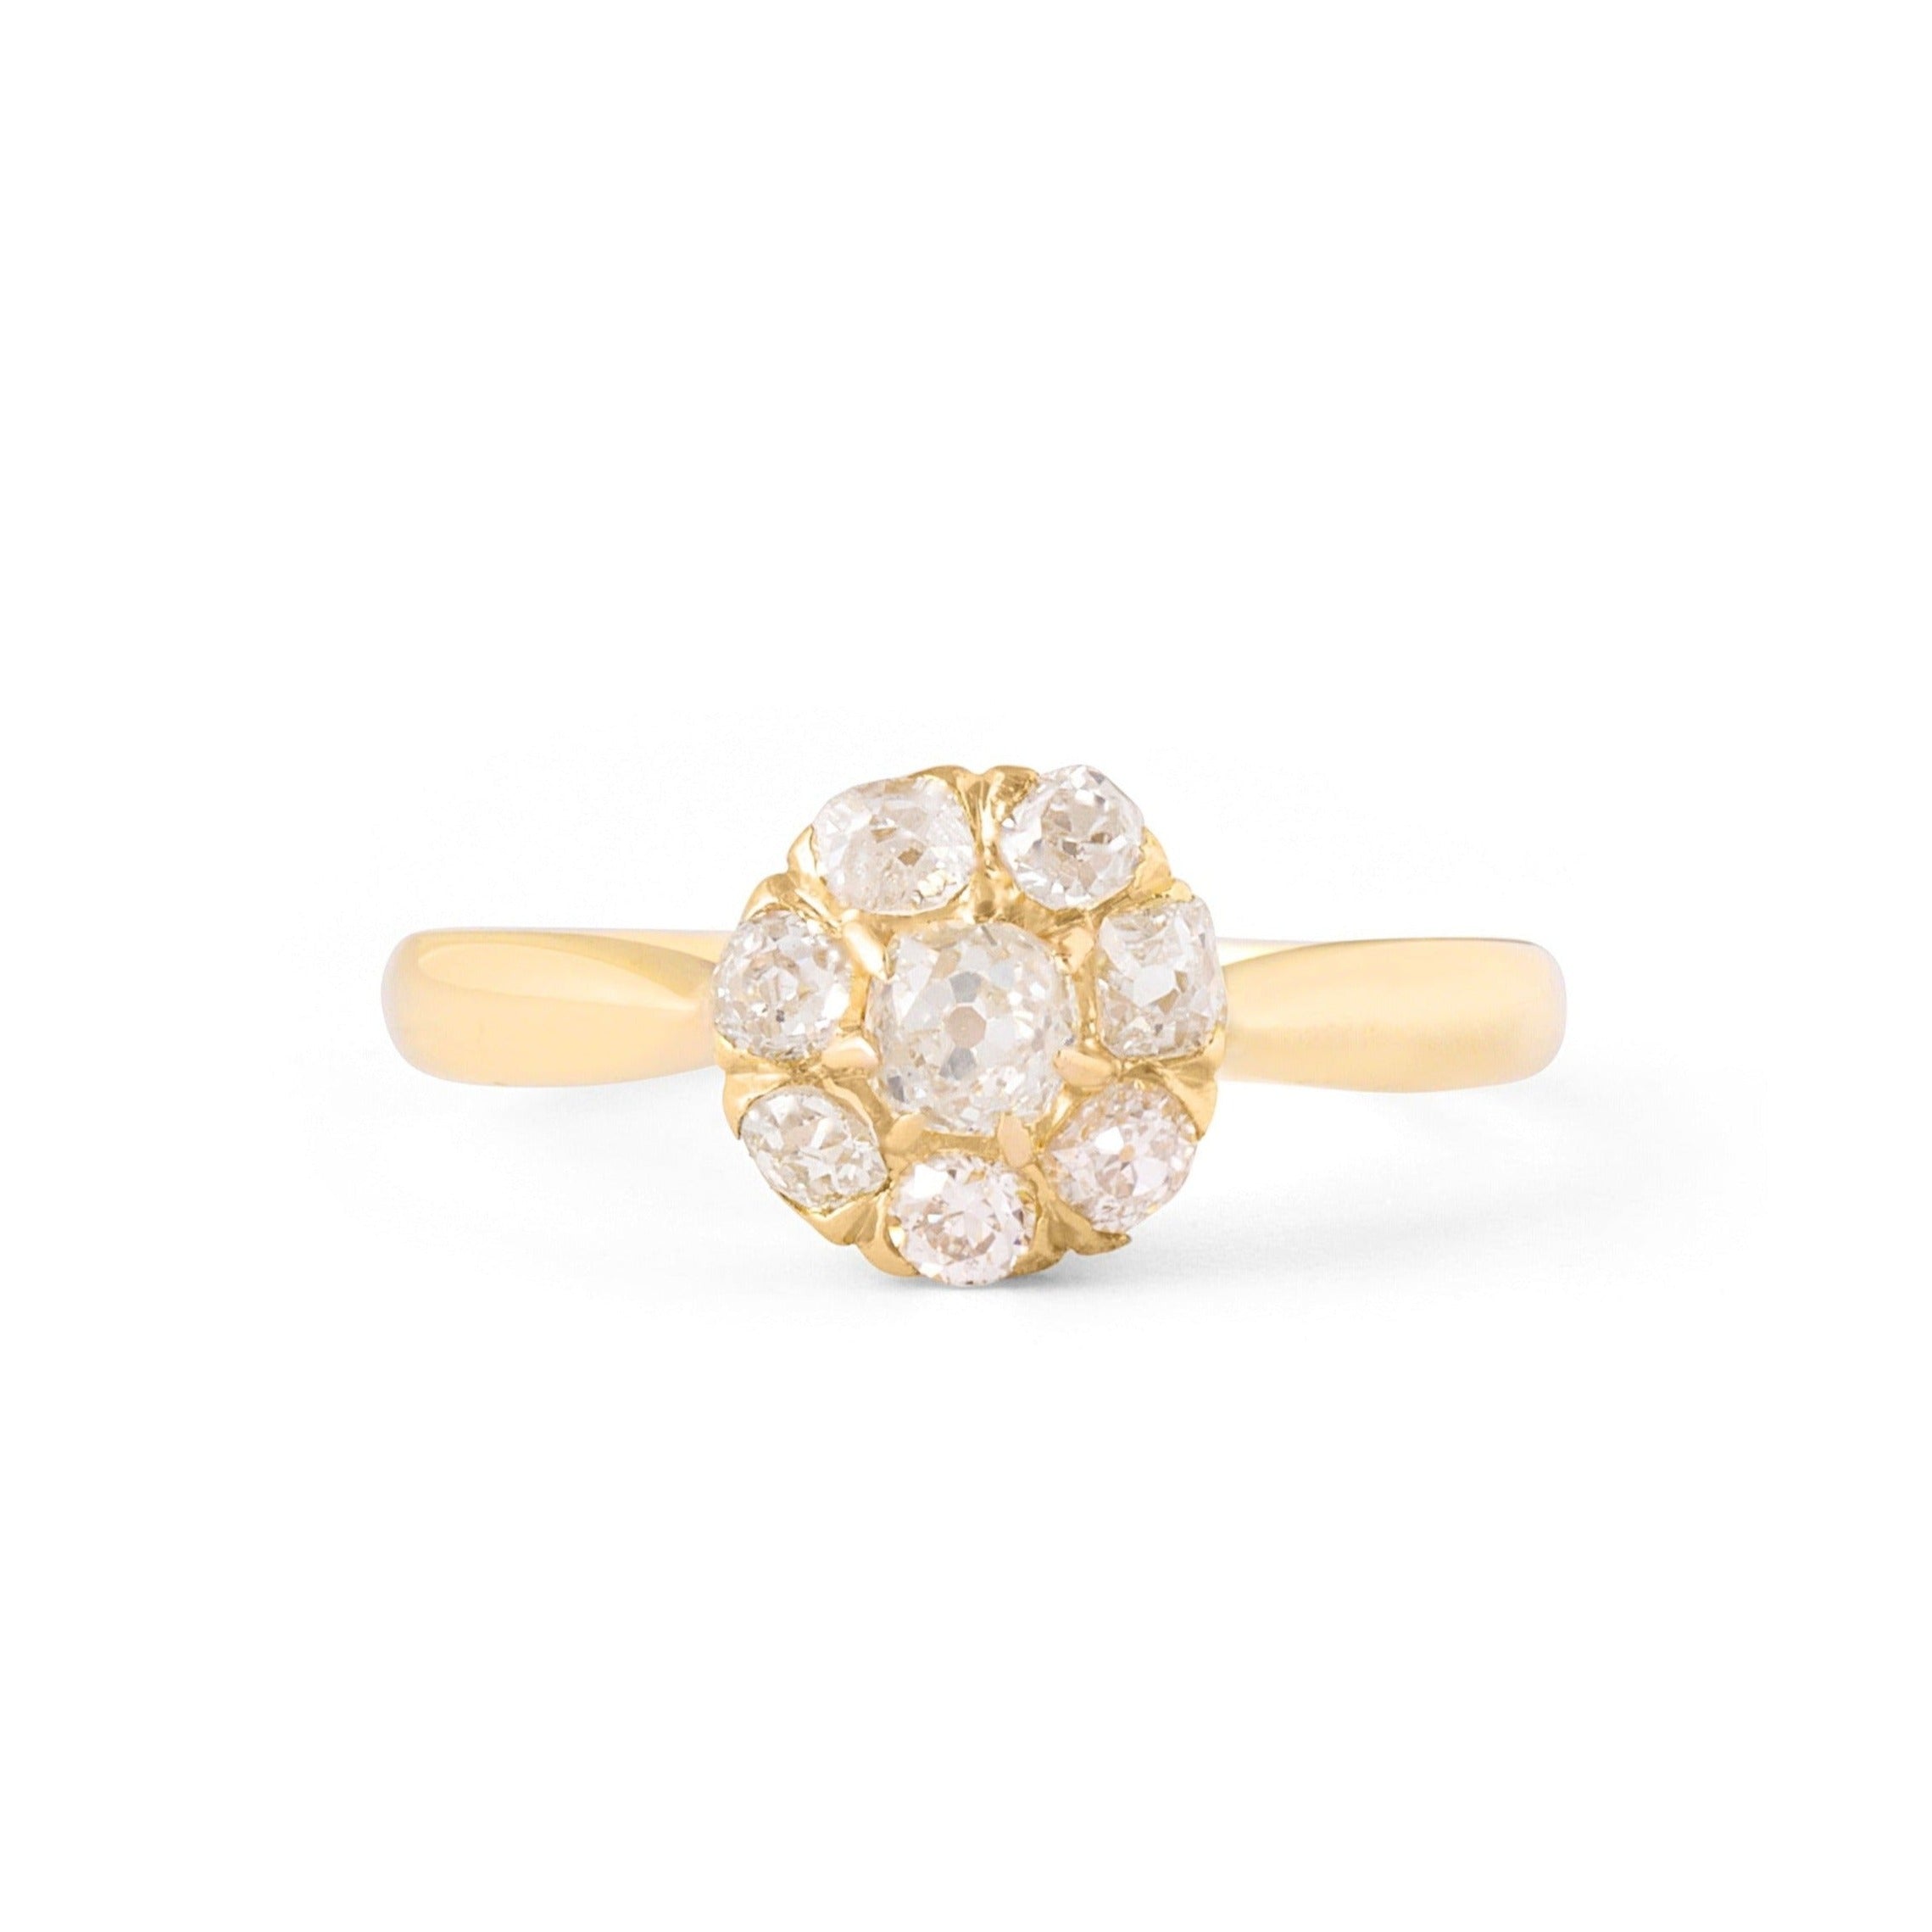 Victorian Old Mine Cut Diamond and 14k Gold Petite Cluster Ring